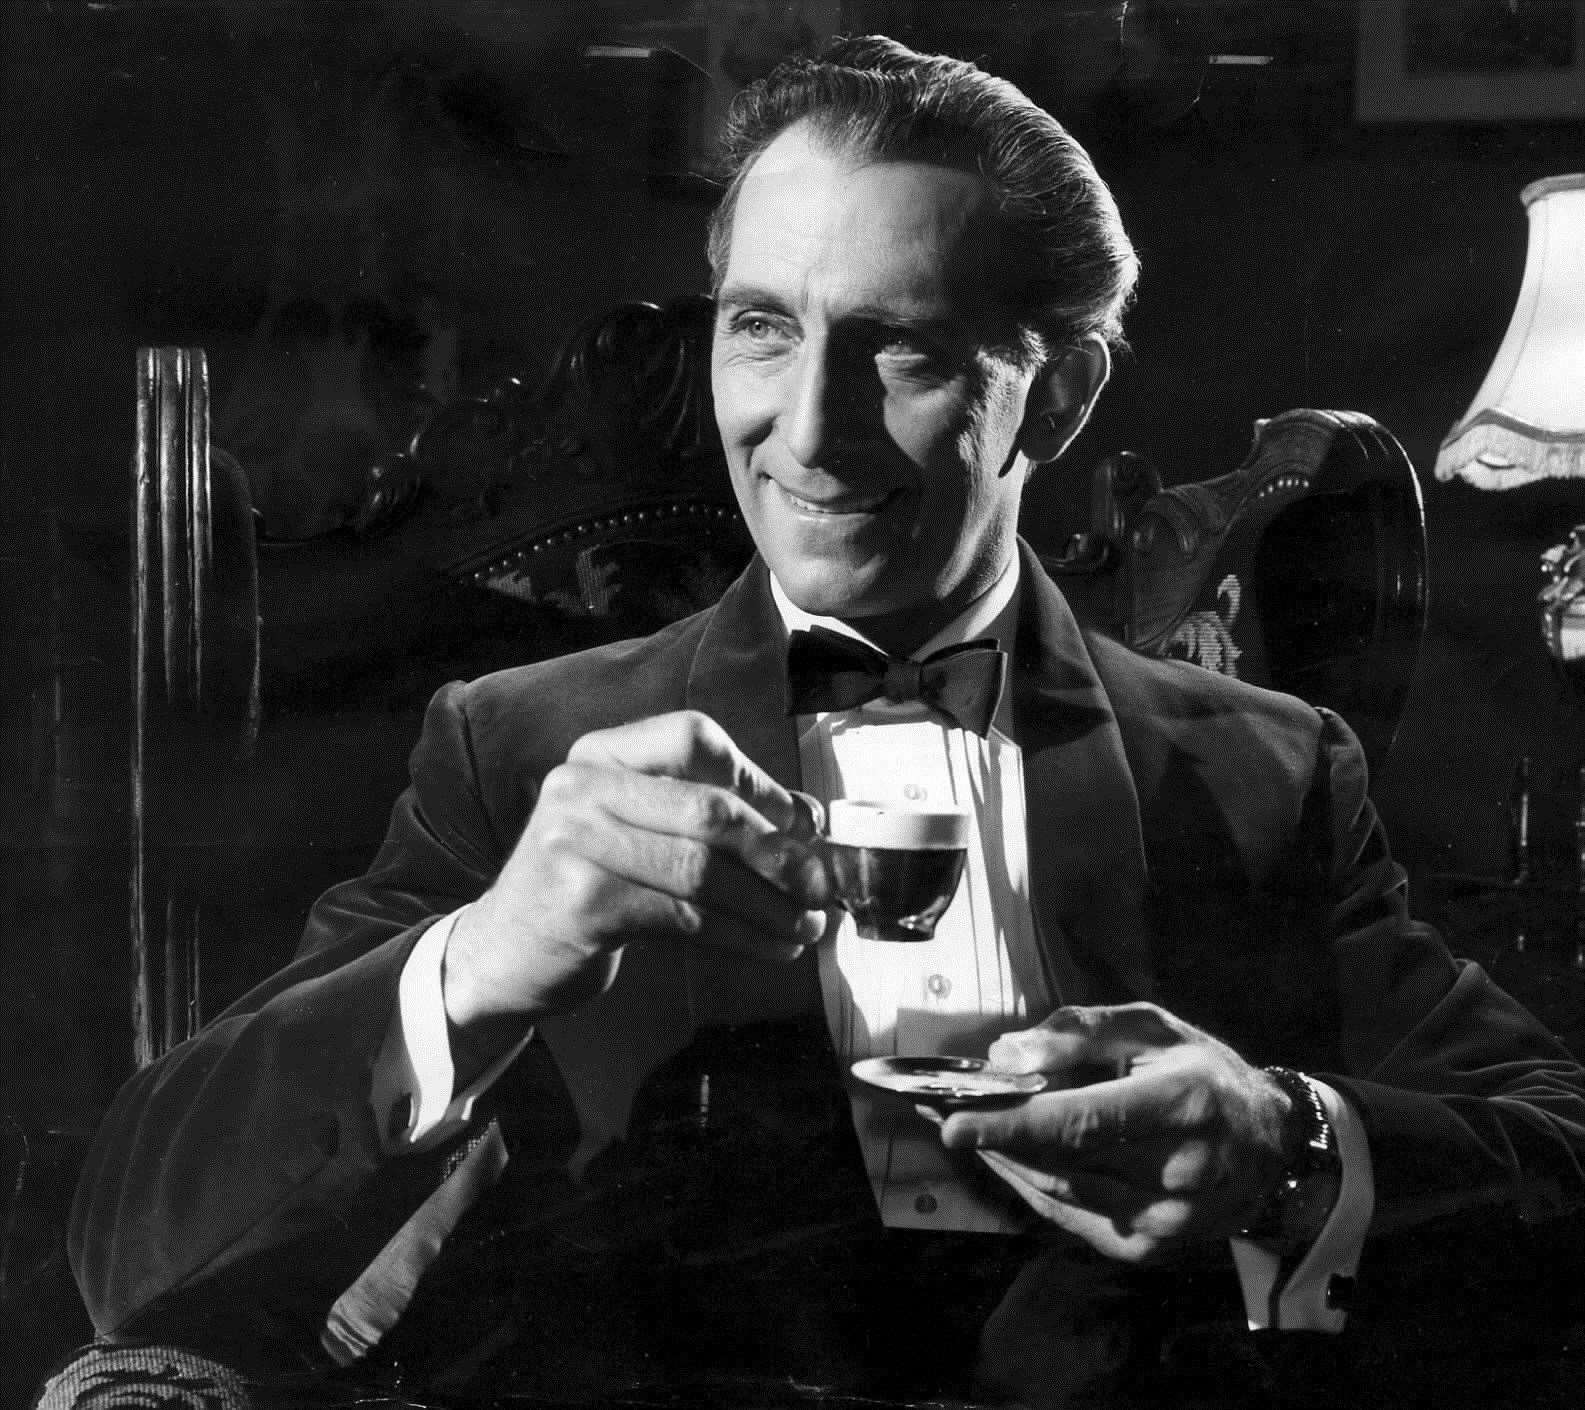 Actor Peter Cushing, who is known for starring in Star Wars, Frankenstein and Dr Who